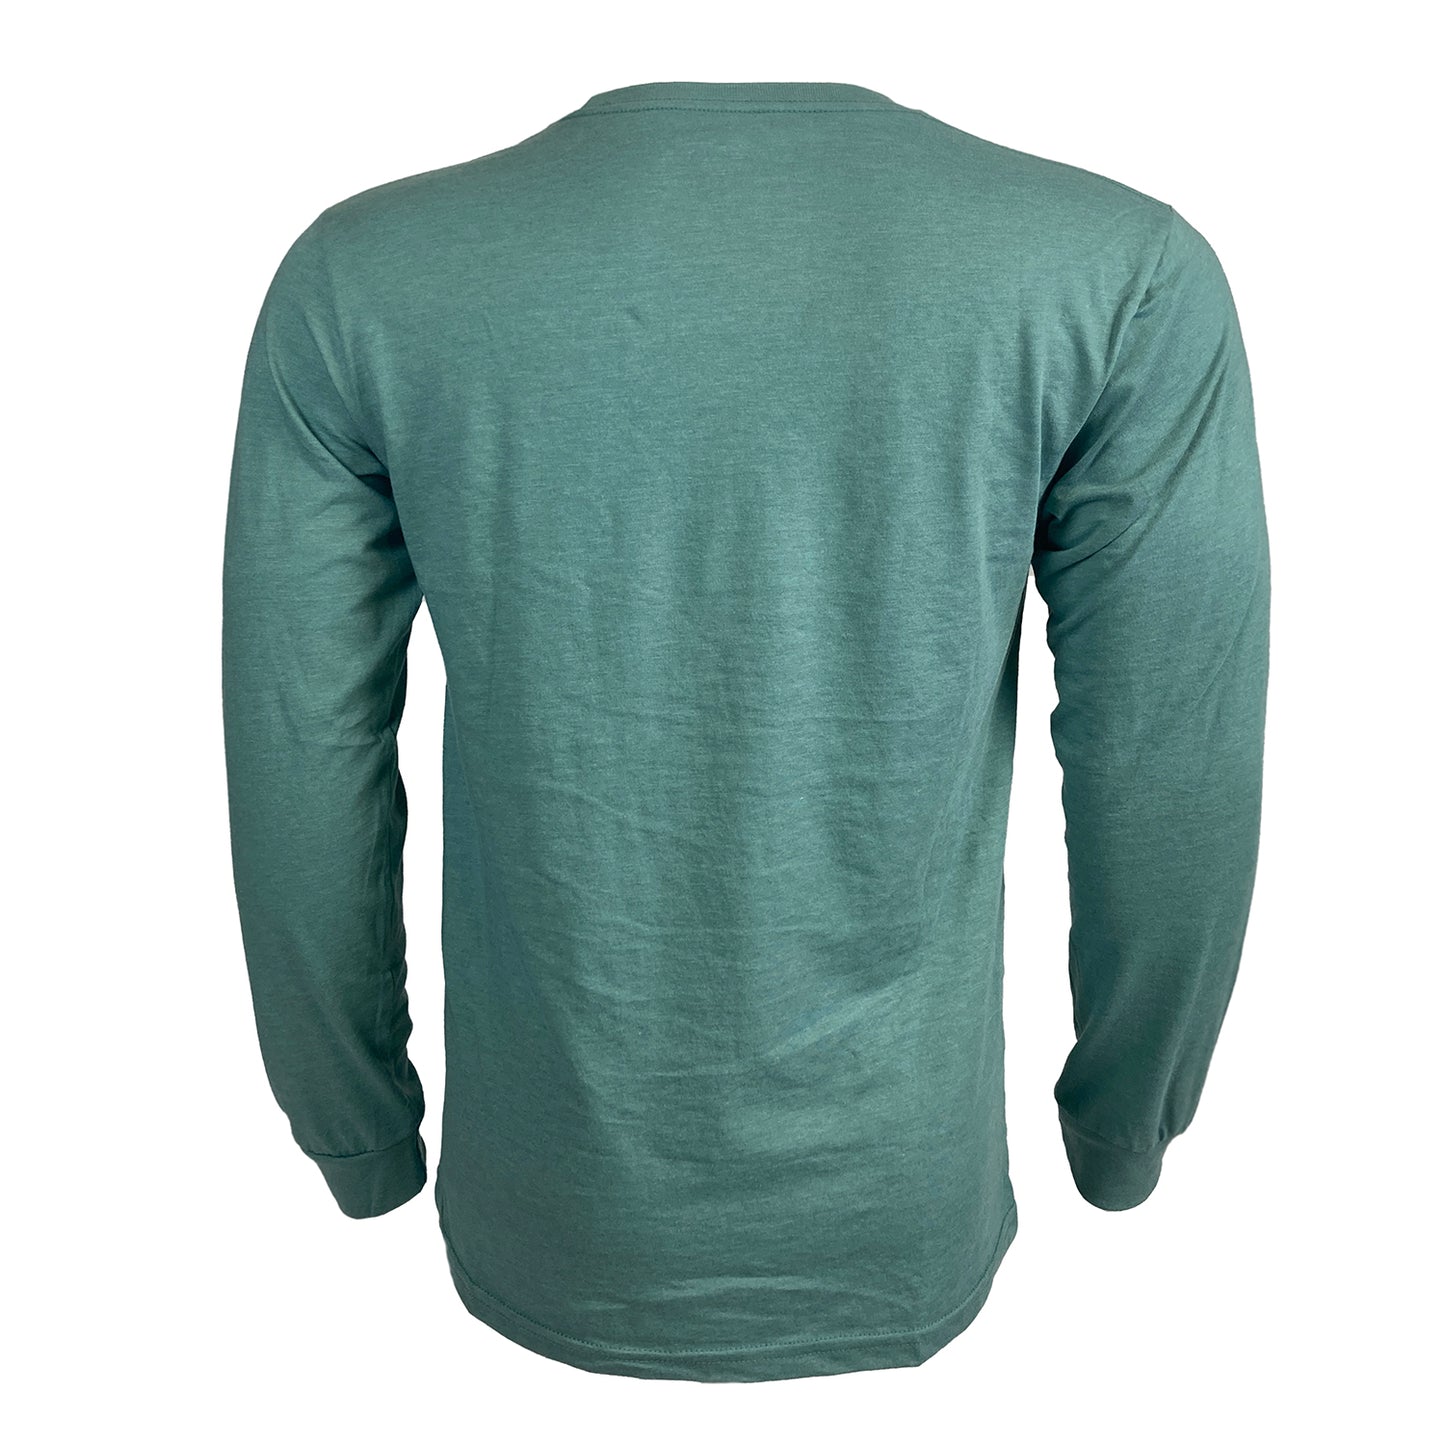 Blue long sleeved tee shown from the back.